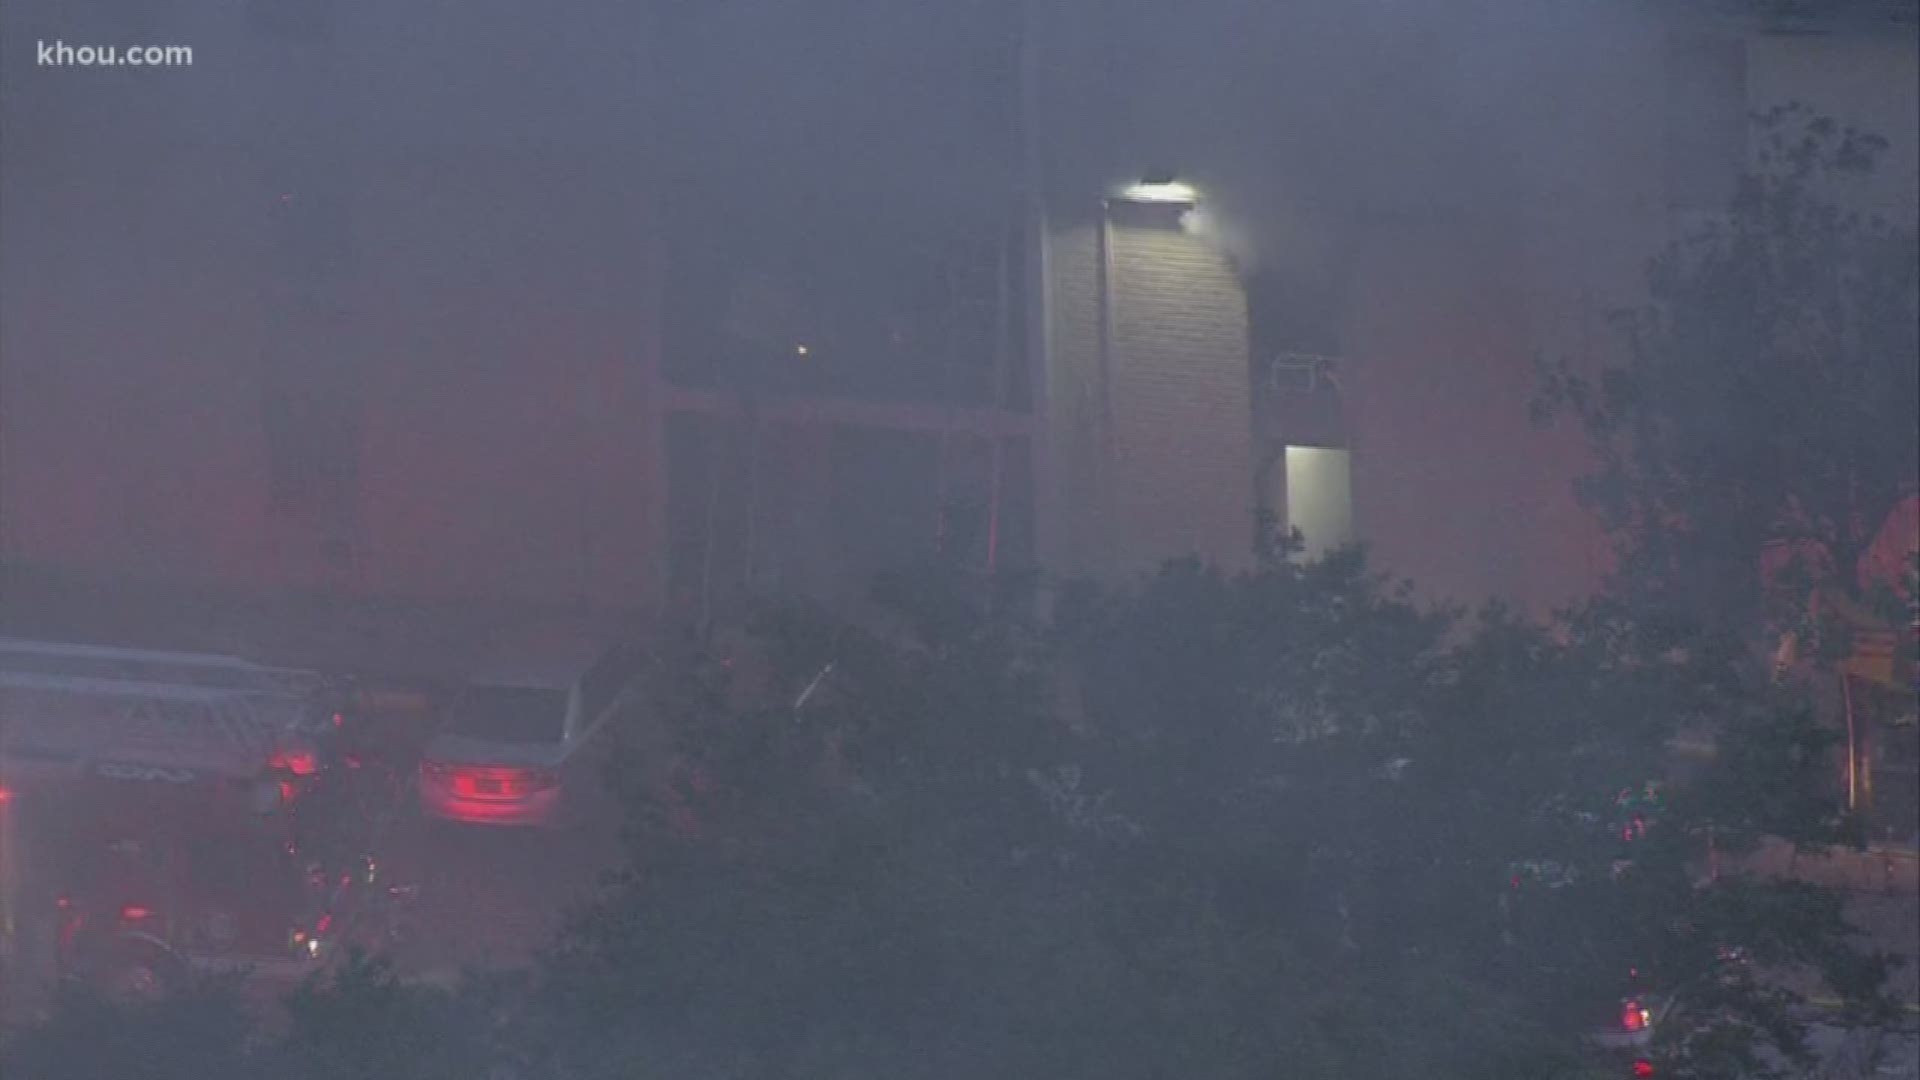 Several firefighters responded to a 3-alarm apartment fire near Hobby Airport. No one was injured.